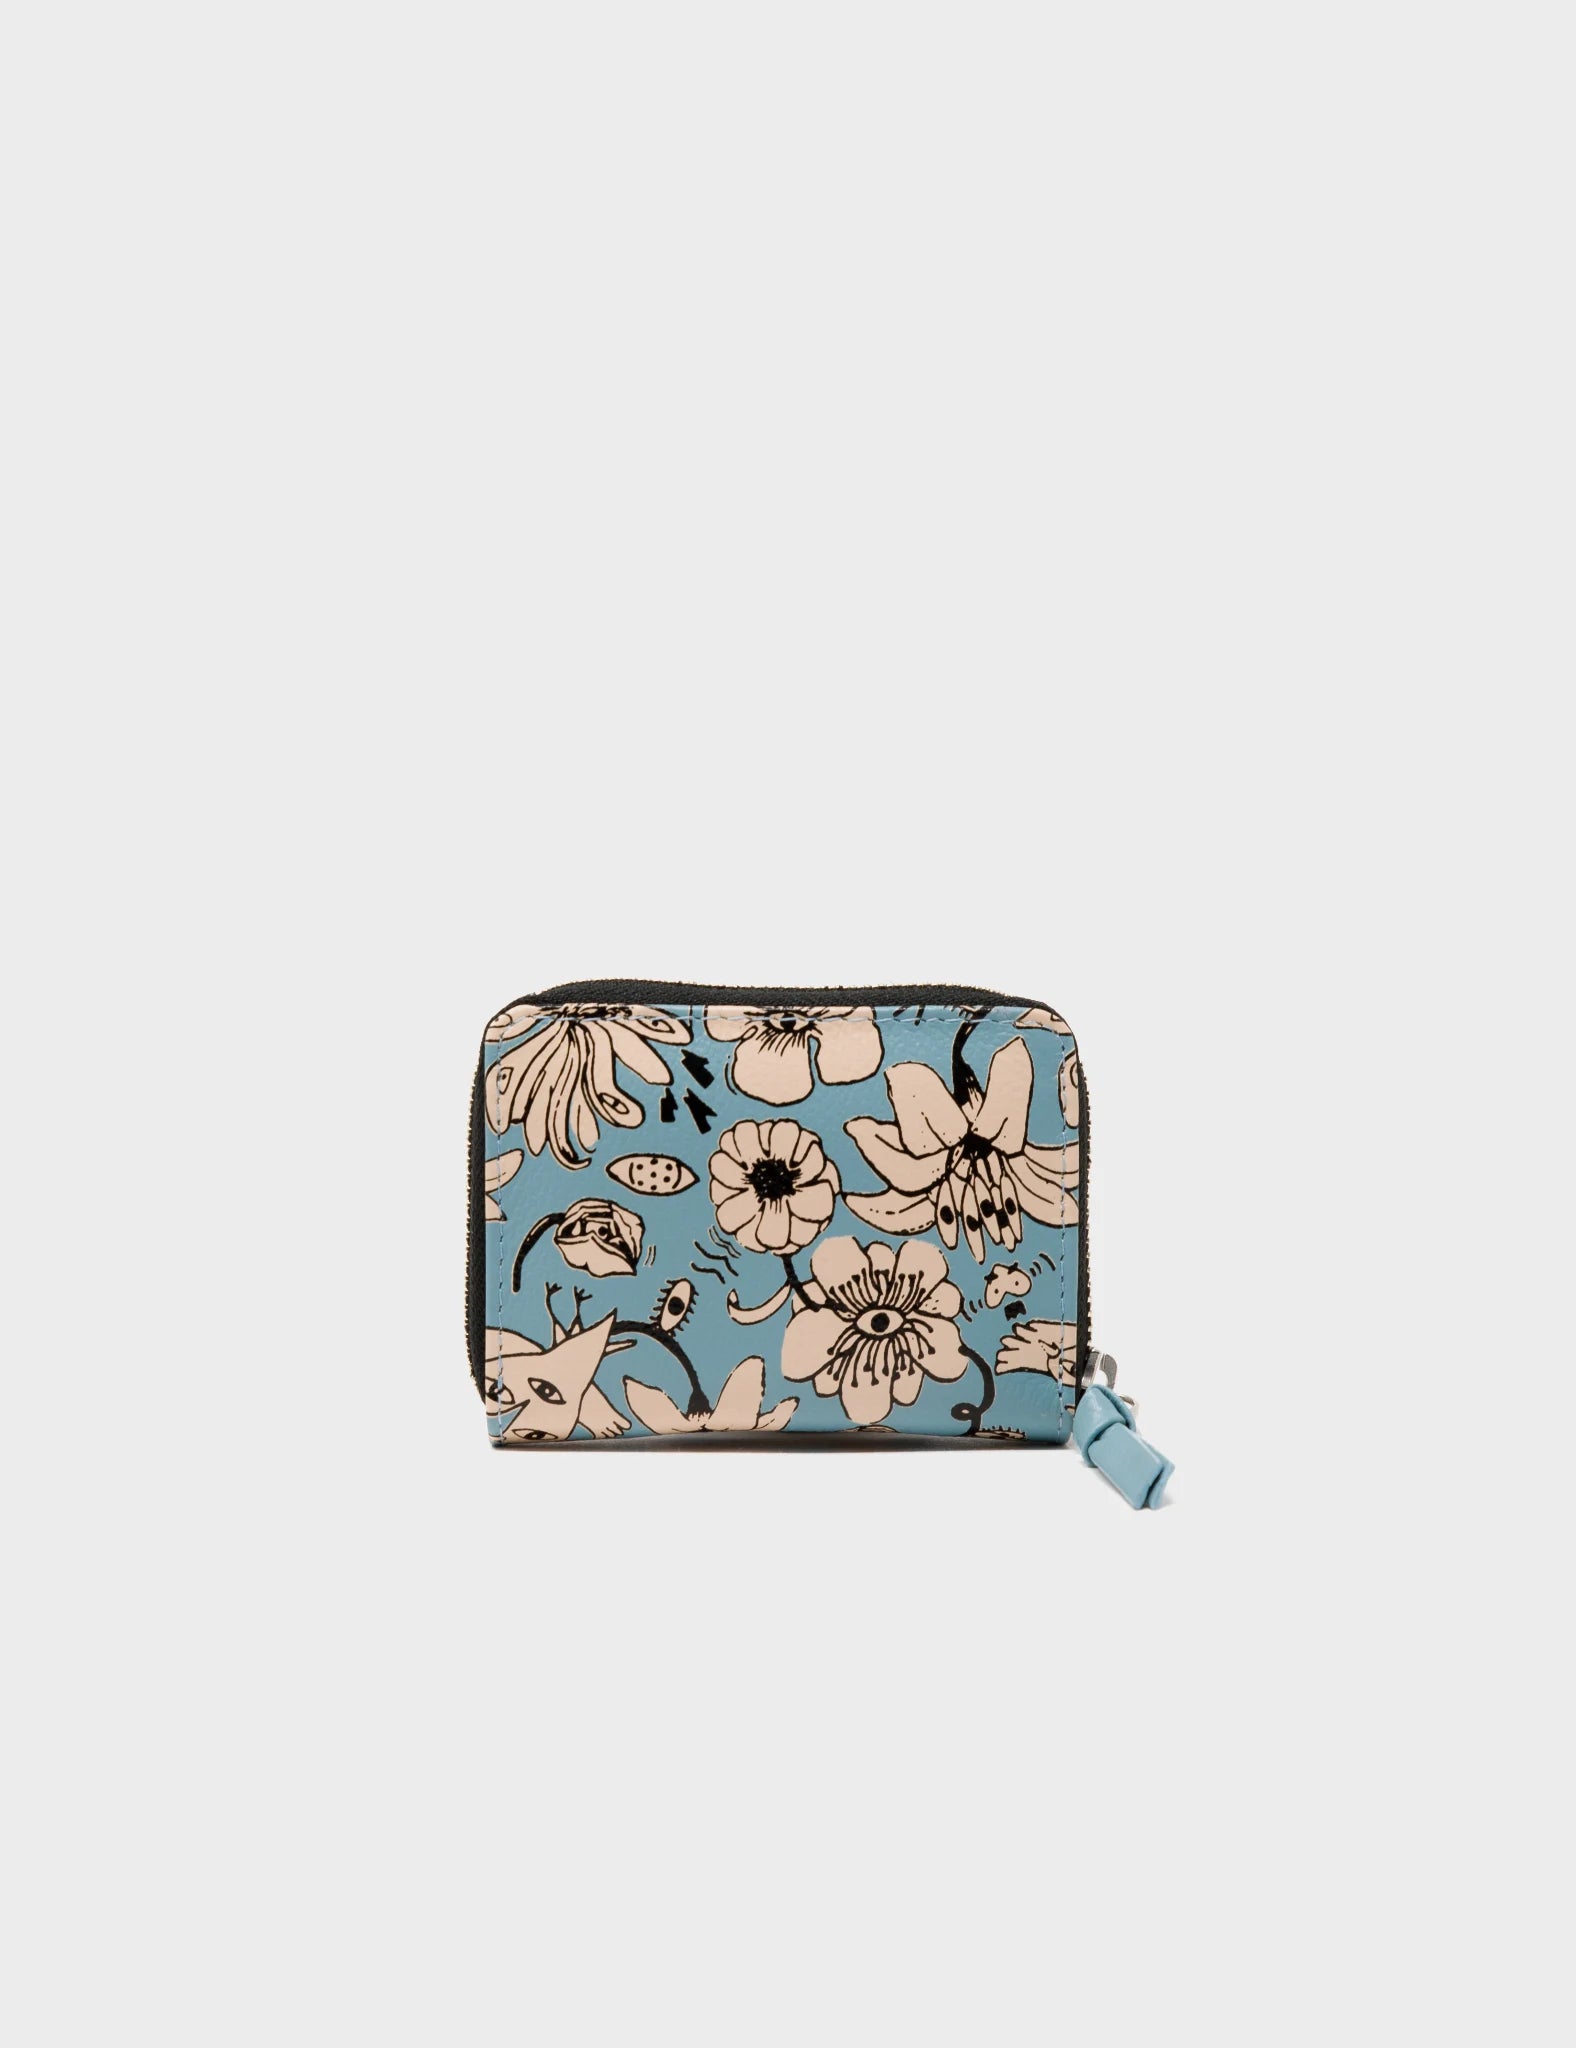 Frodo Cameo Blue Leather Zip Around Wallet - Floral Print - Back 